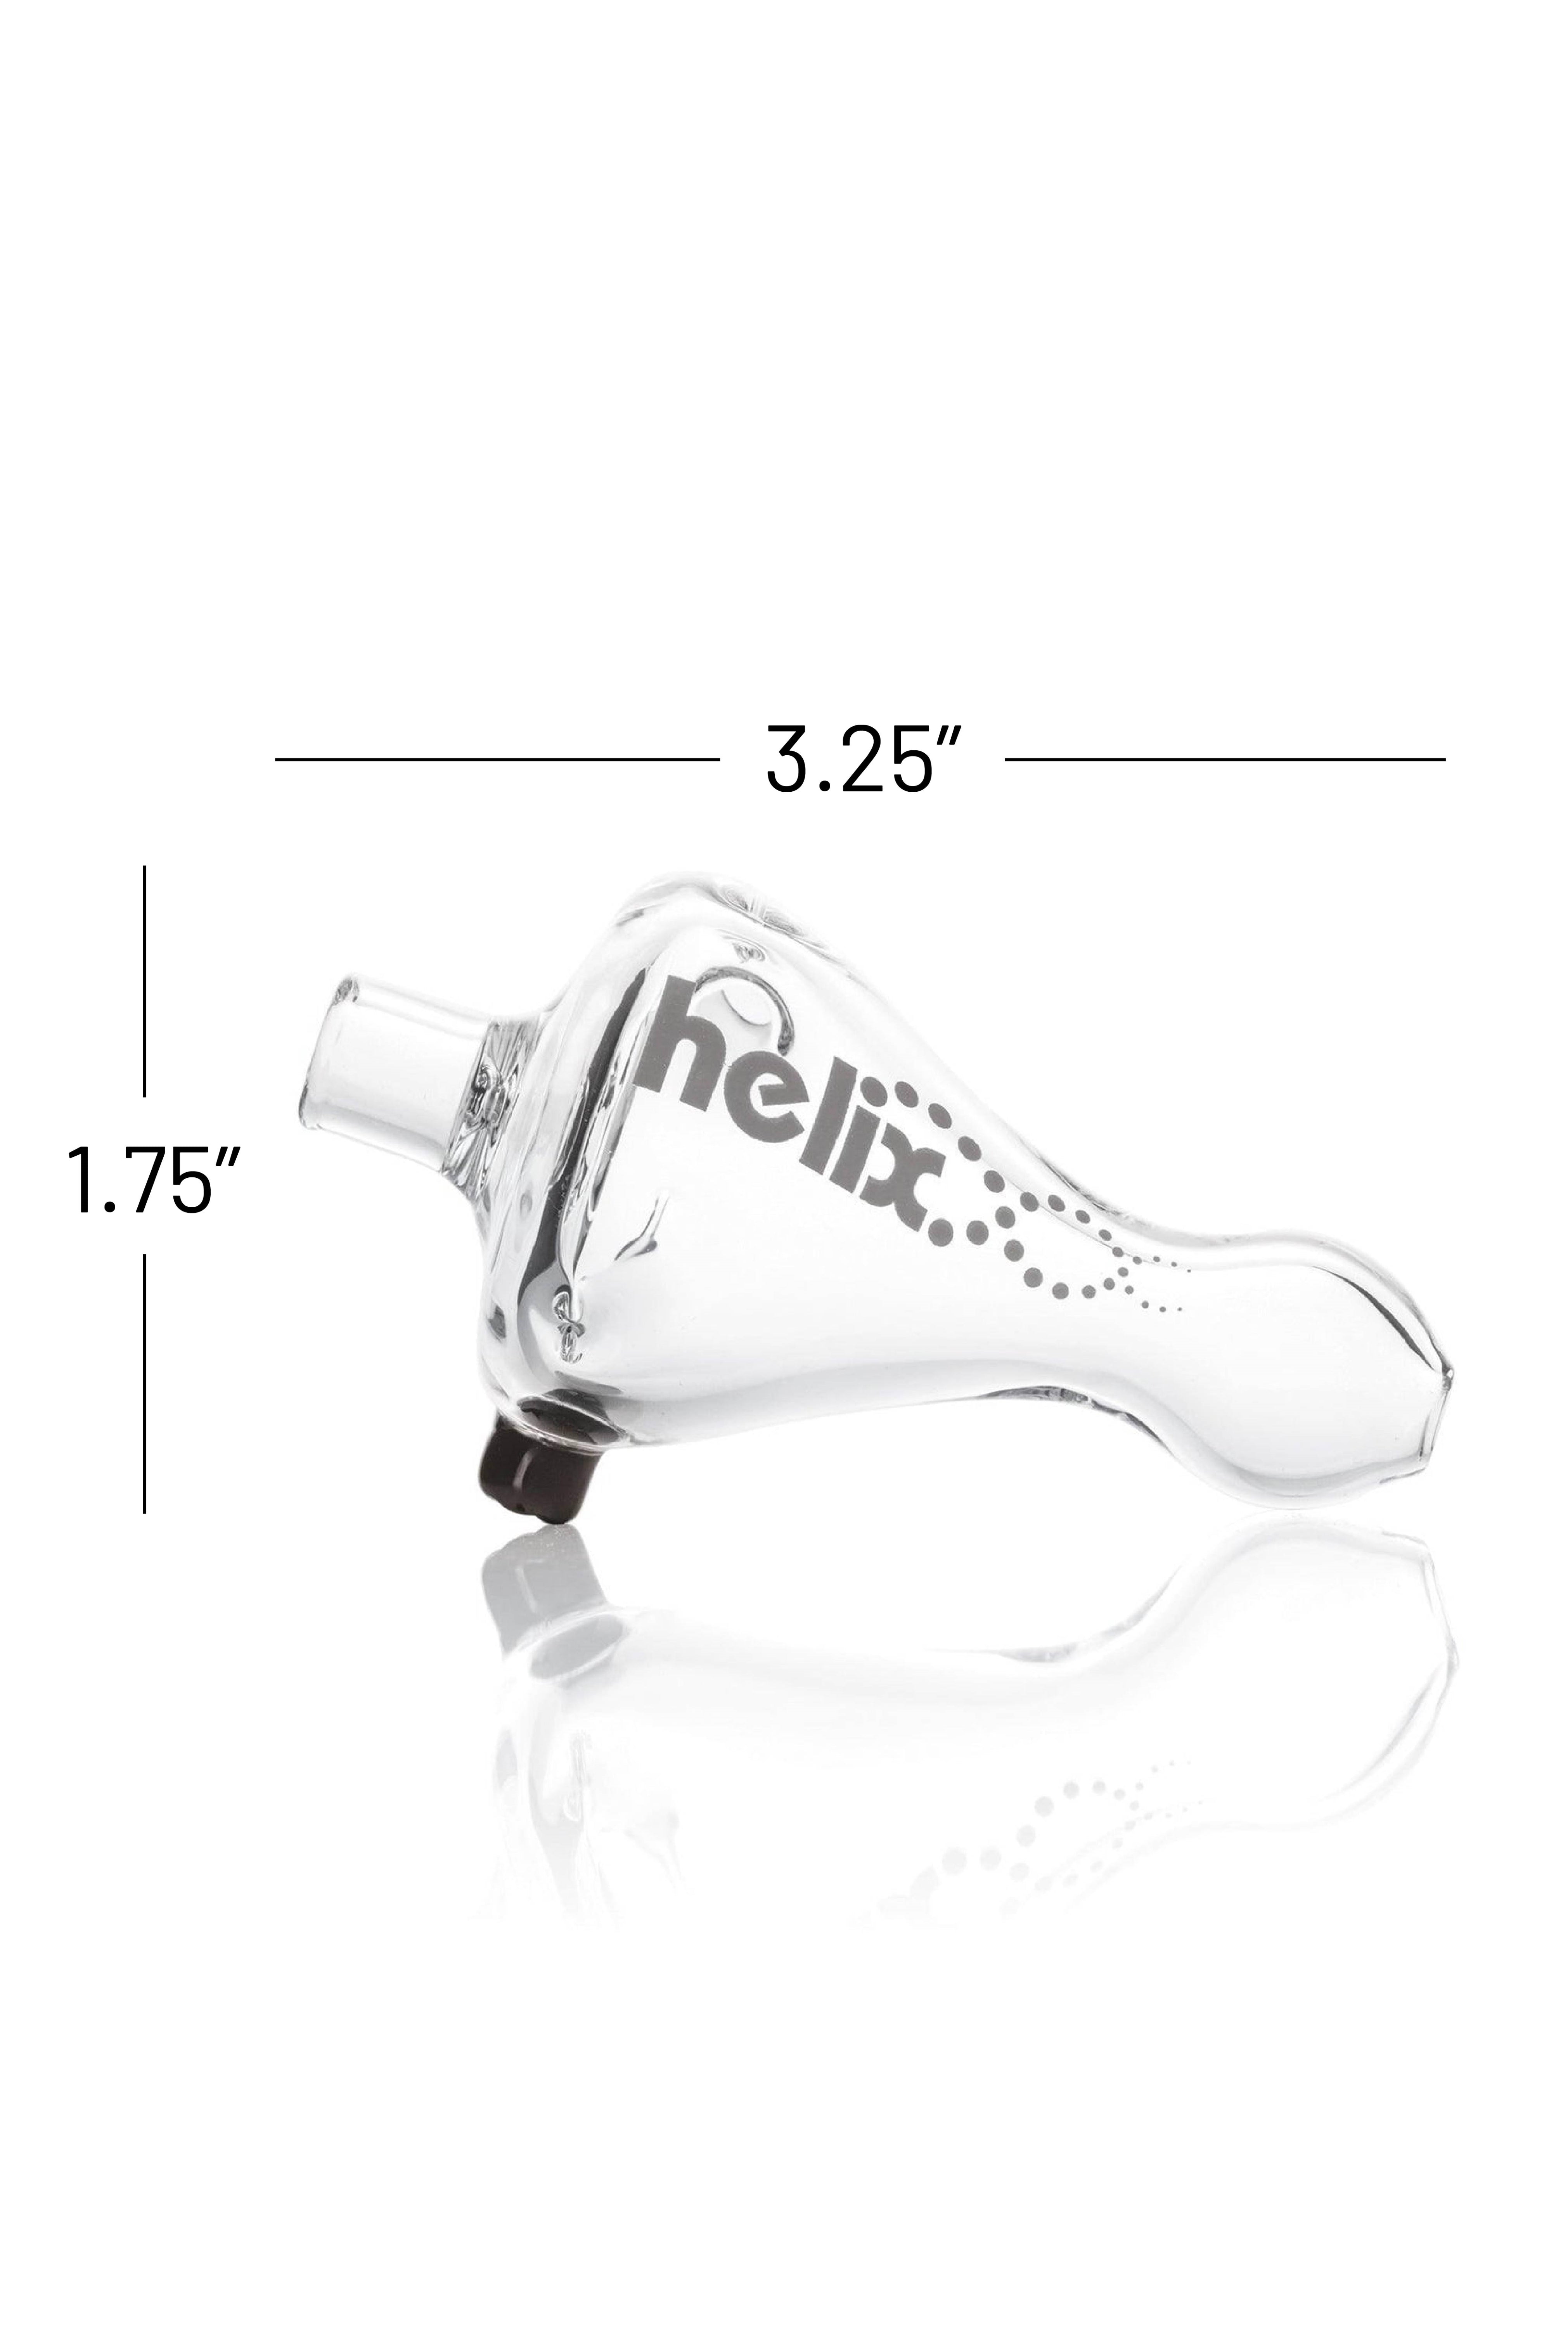 3" Helix™ Chillum - Clear - Pack of 5